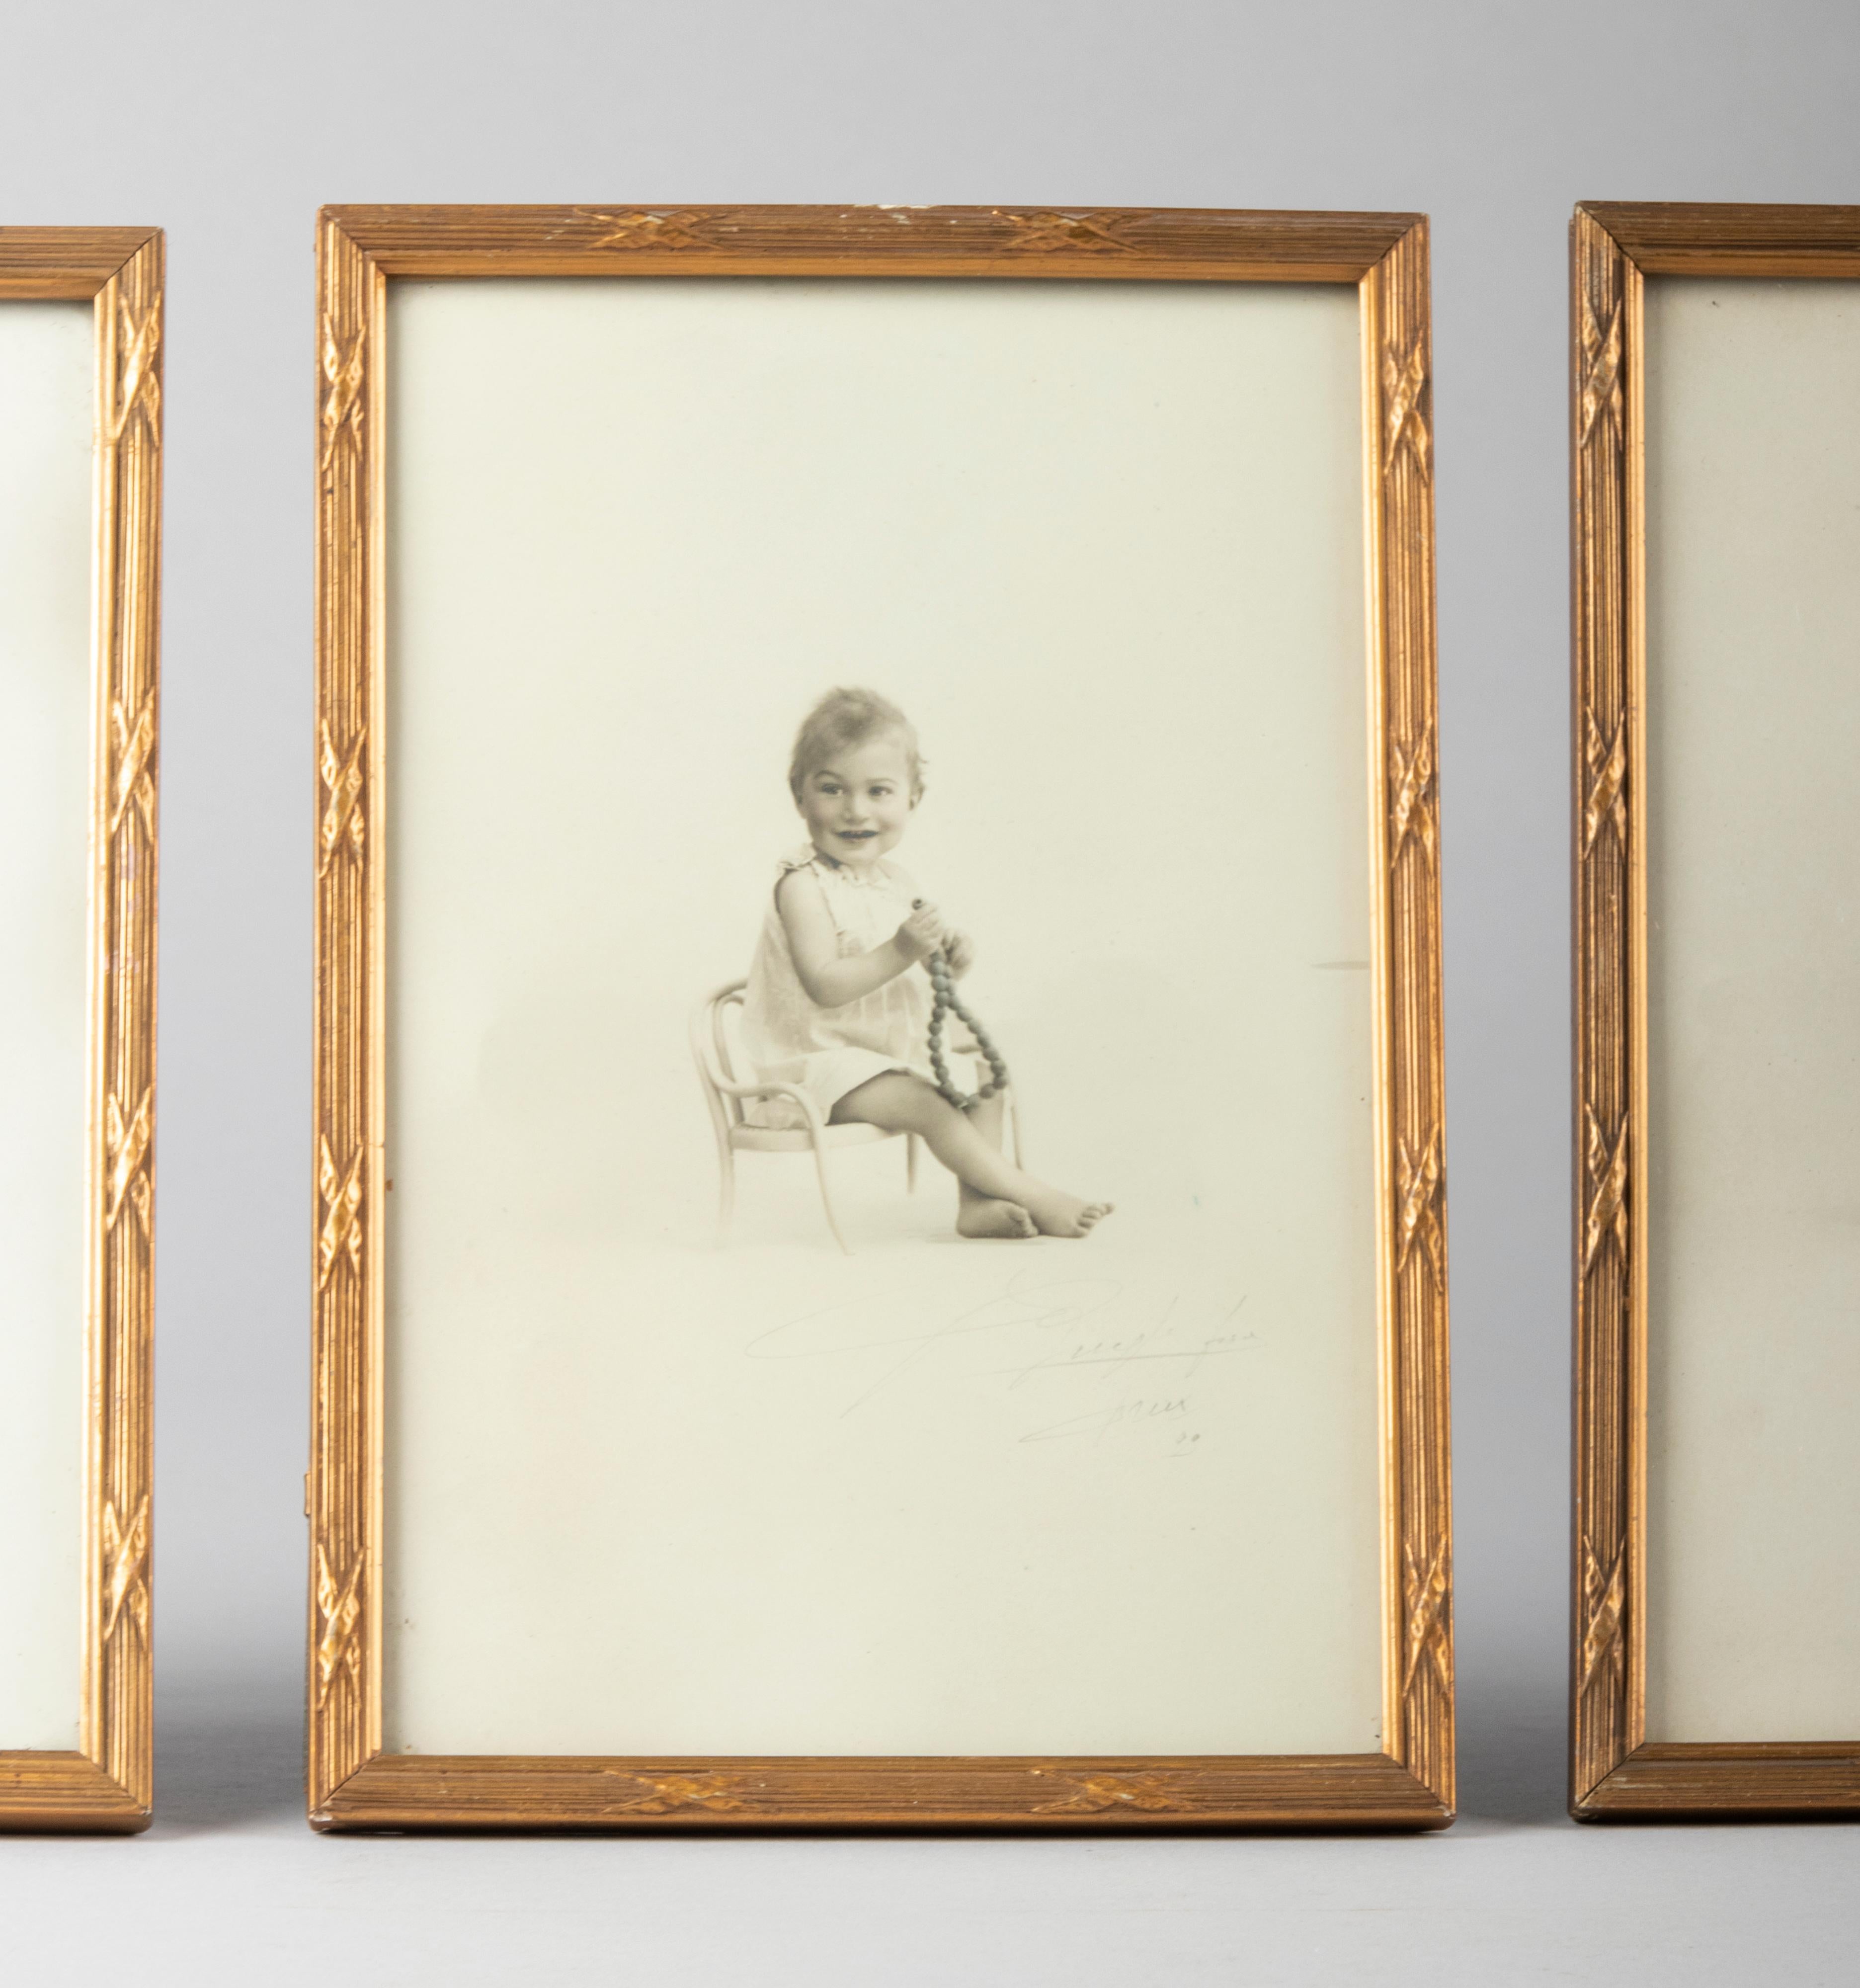 Hand-Crafted Set of 3 Early 20th Century Picture Frames in Louis XVI-Style